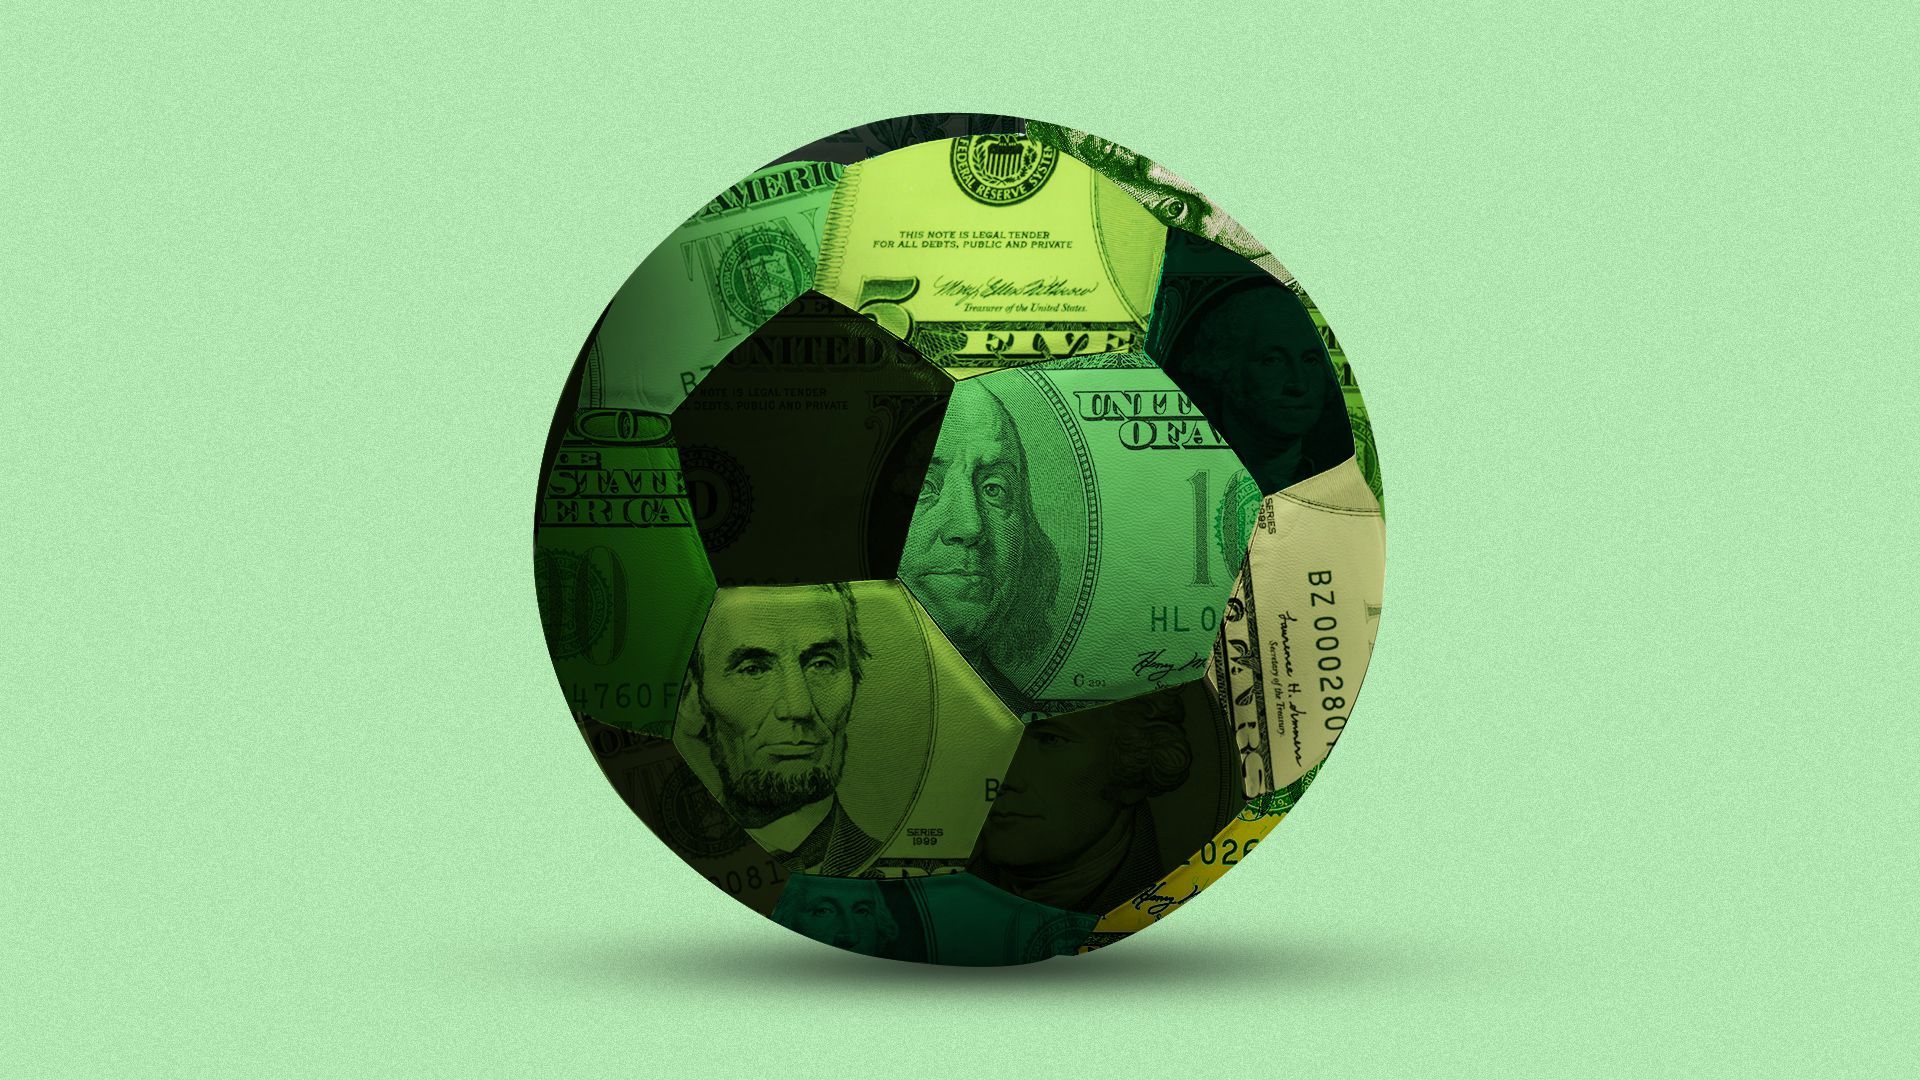 Illustration of a soccer ball made out of a patchwork of different bill denominations